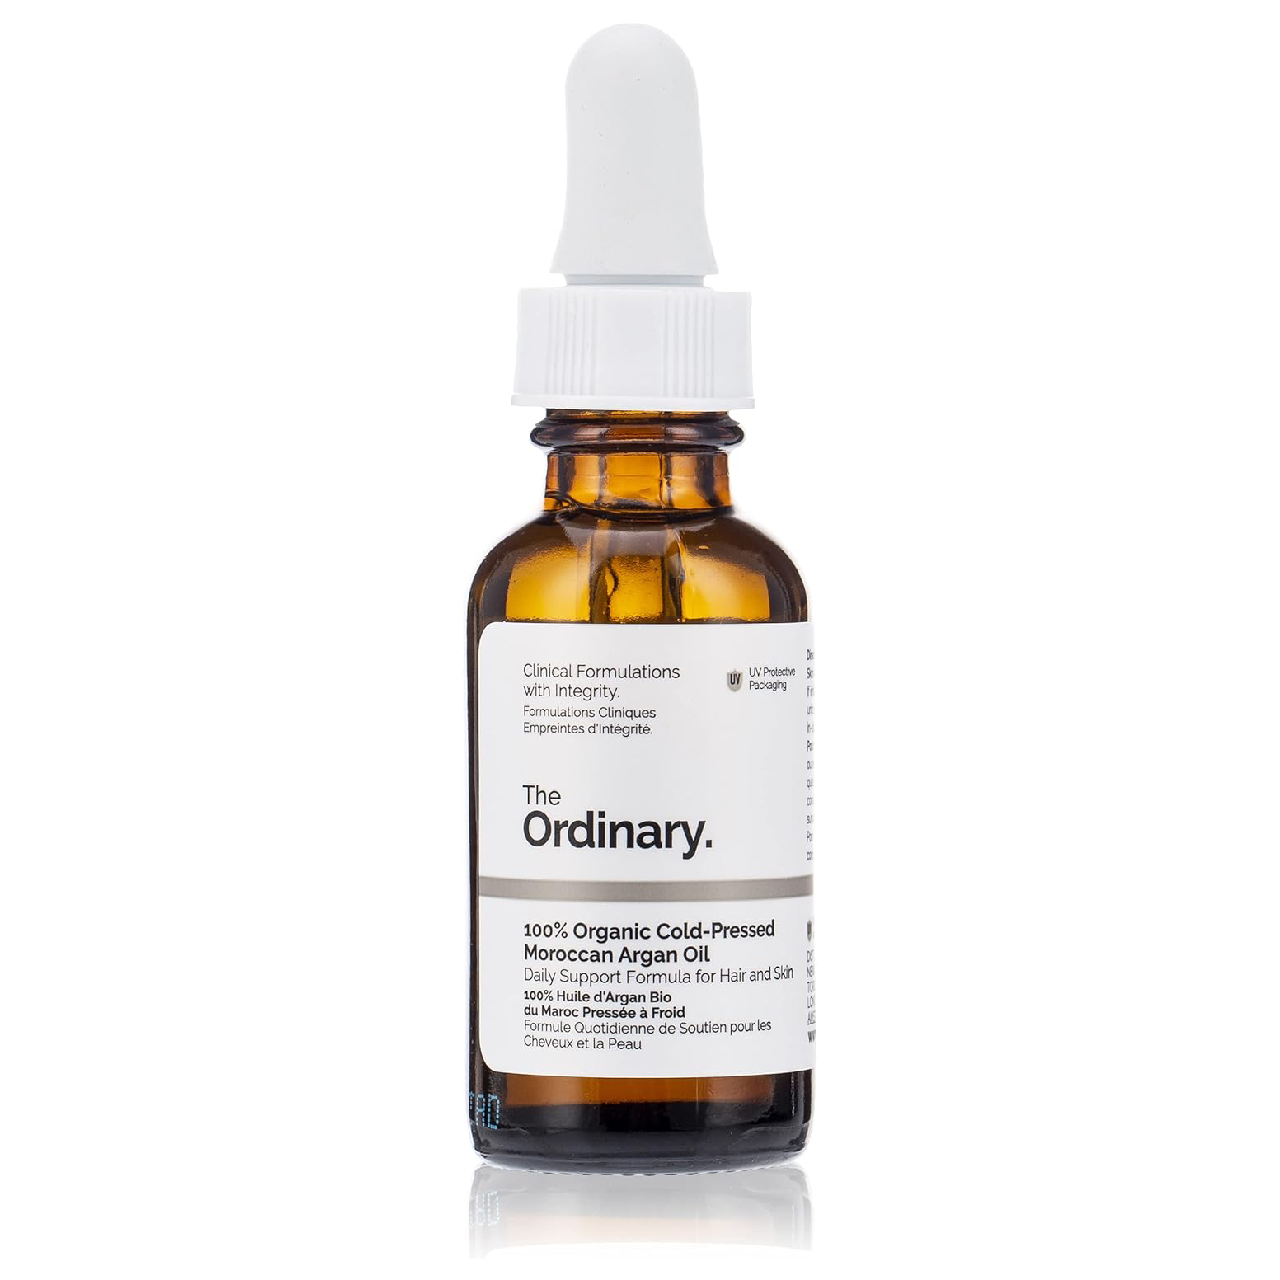 Bottle of The Ordinary 100% Organic Cold-Pressed Moroccan Argan Oil on a white background